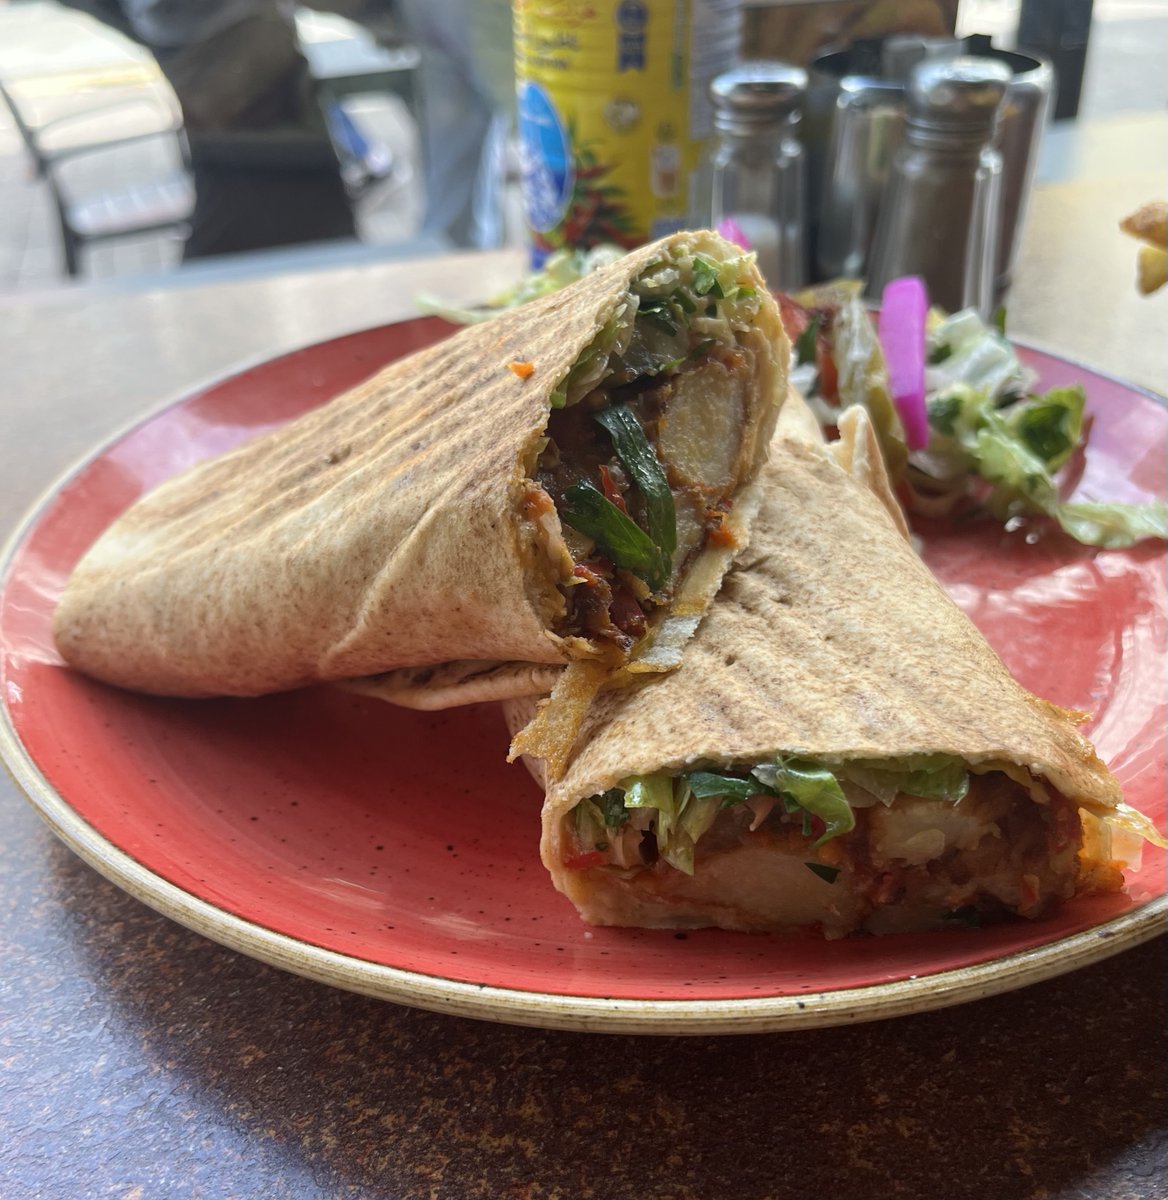 Meaty, Veggie, or Vegan, we've got the perfect lunch option for everyone 😋
.
.
.
#wrap #tasty #liverpoolfood #foodies #liverpoolrestaurant #loveliverpool #liverpoolfoodie #boldstreet #foodie #lunch #vegan #veganeats #liverpoolvegan